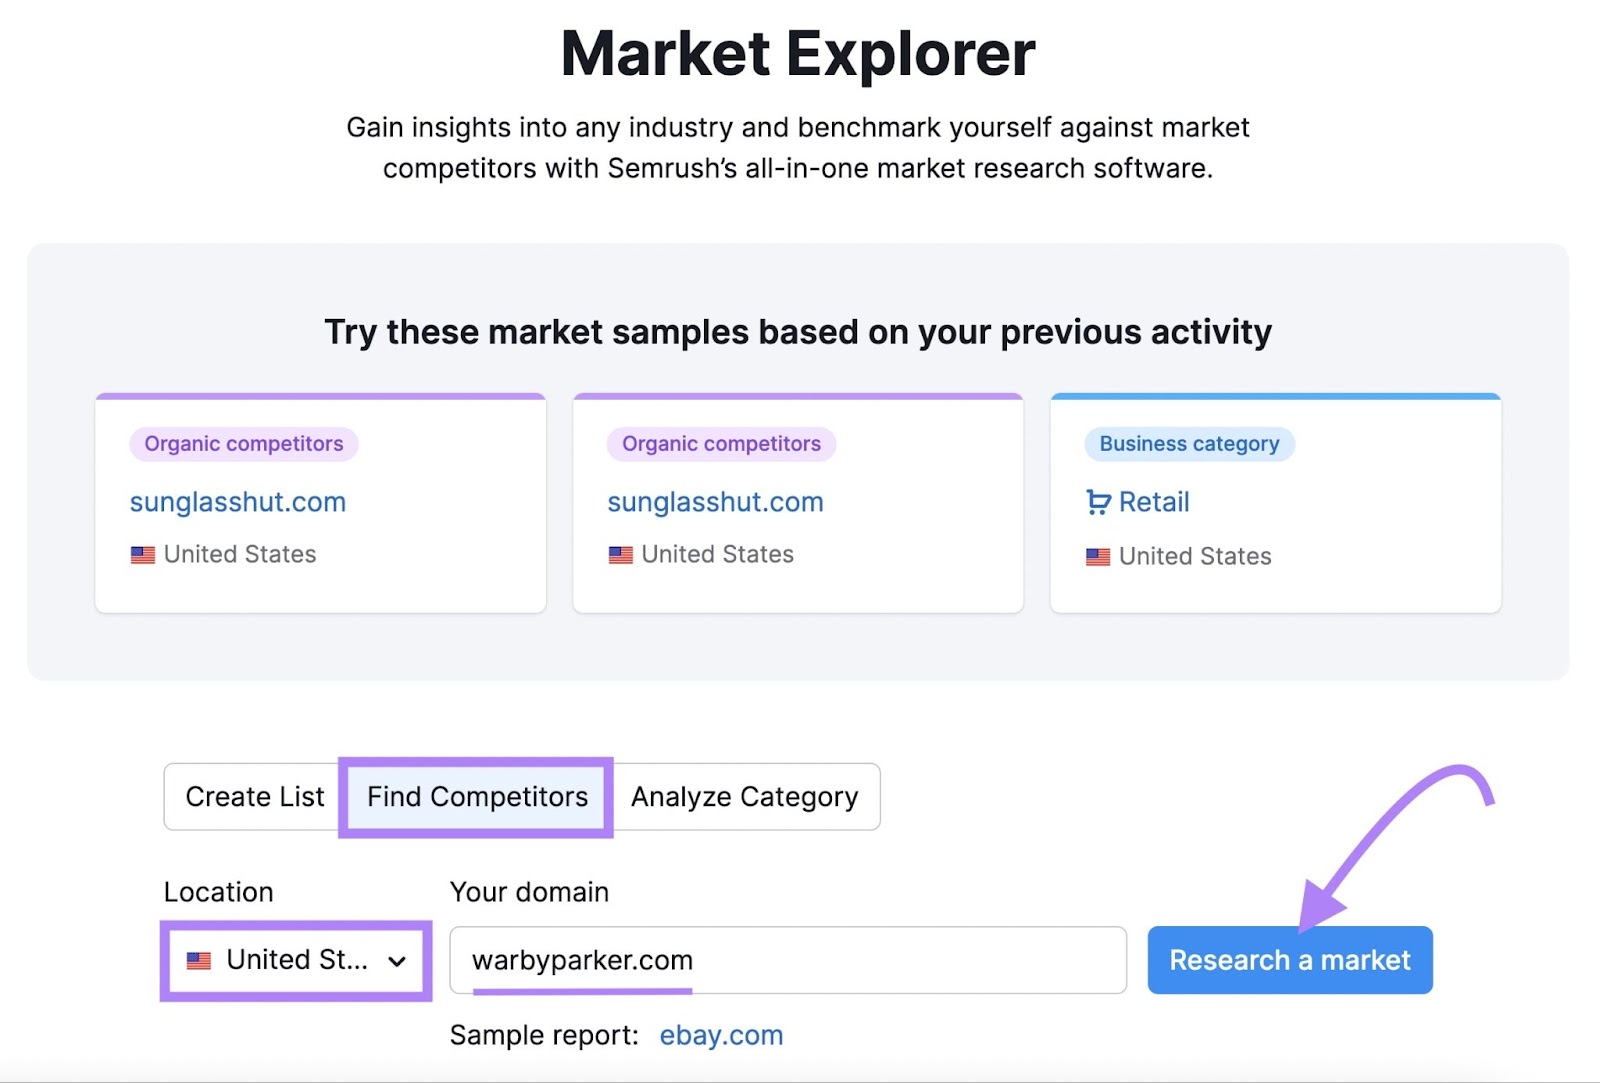 find competitors for "warbyparker.com" in the US using Market Explorer tool